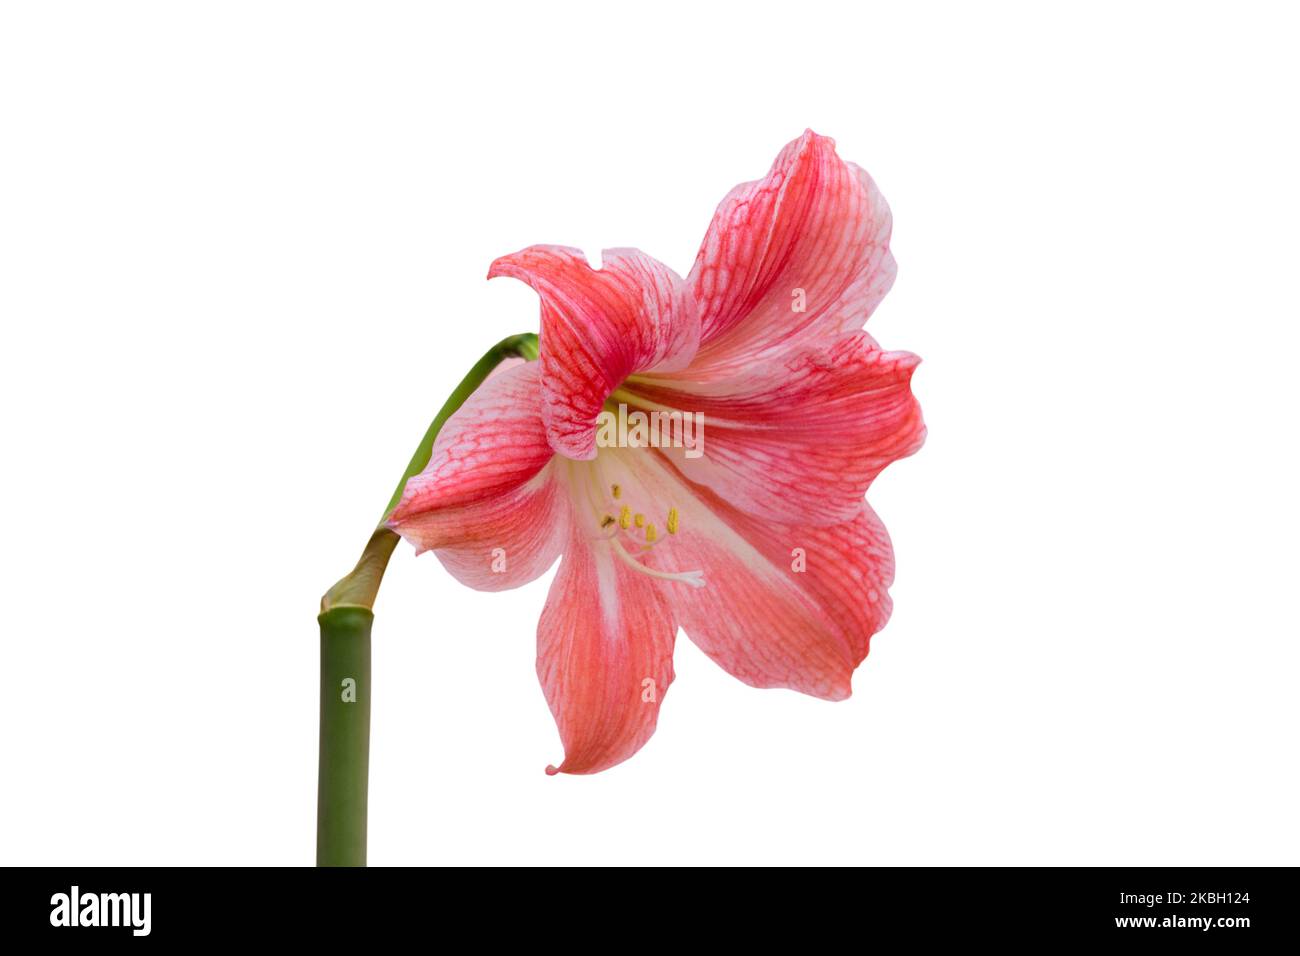 beautiful flower Hippeastrum isolated with stem Stock Photo